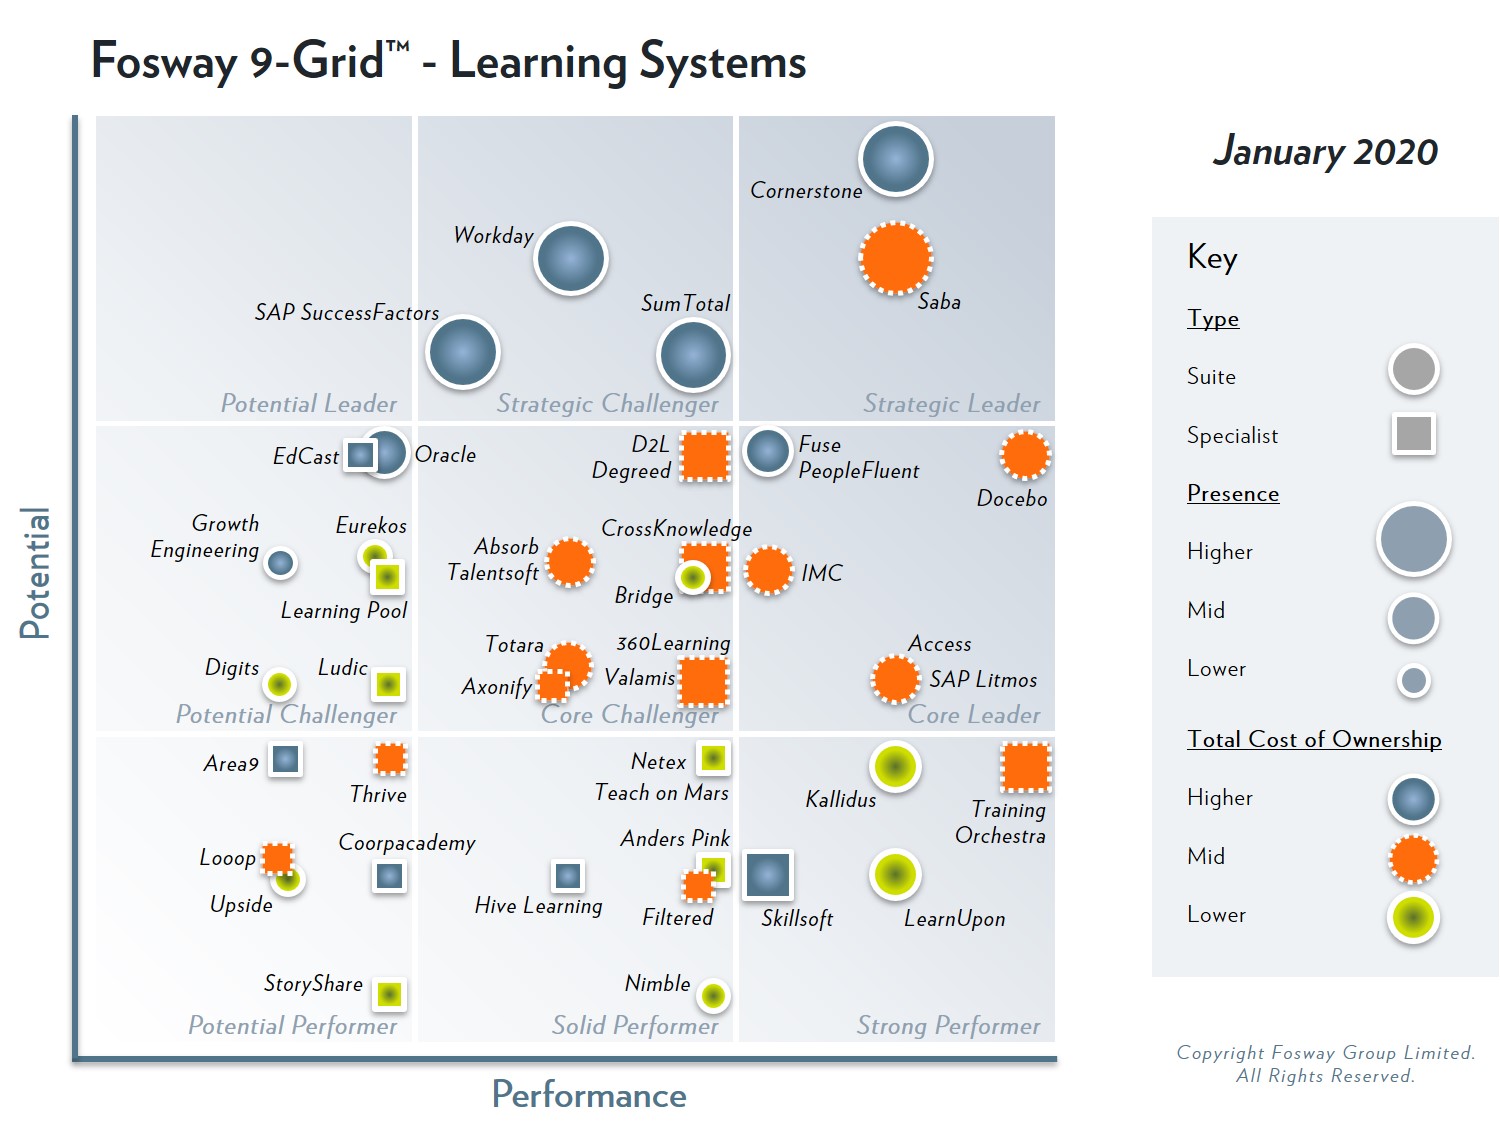 2020 Fosway 9-Grid Learning Systems